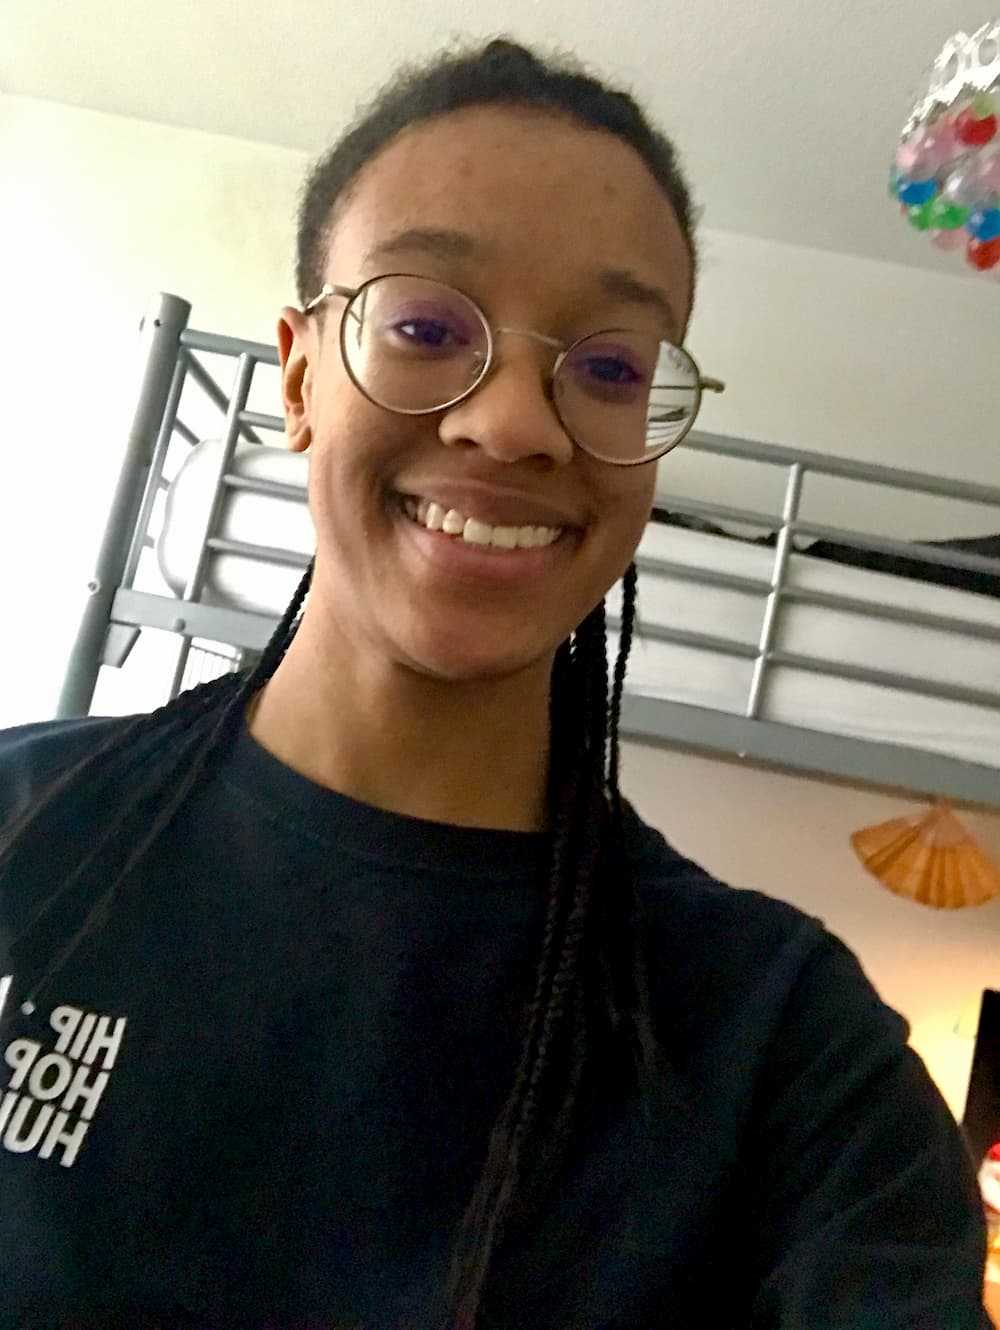 A selfie of Imani wearing a HipHopHuis shirt. She's in her bedroom similing, looking kind of goofy with her glasses on.